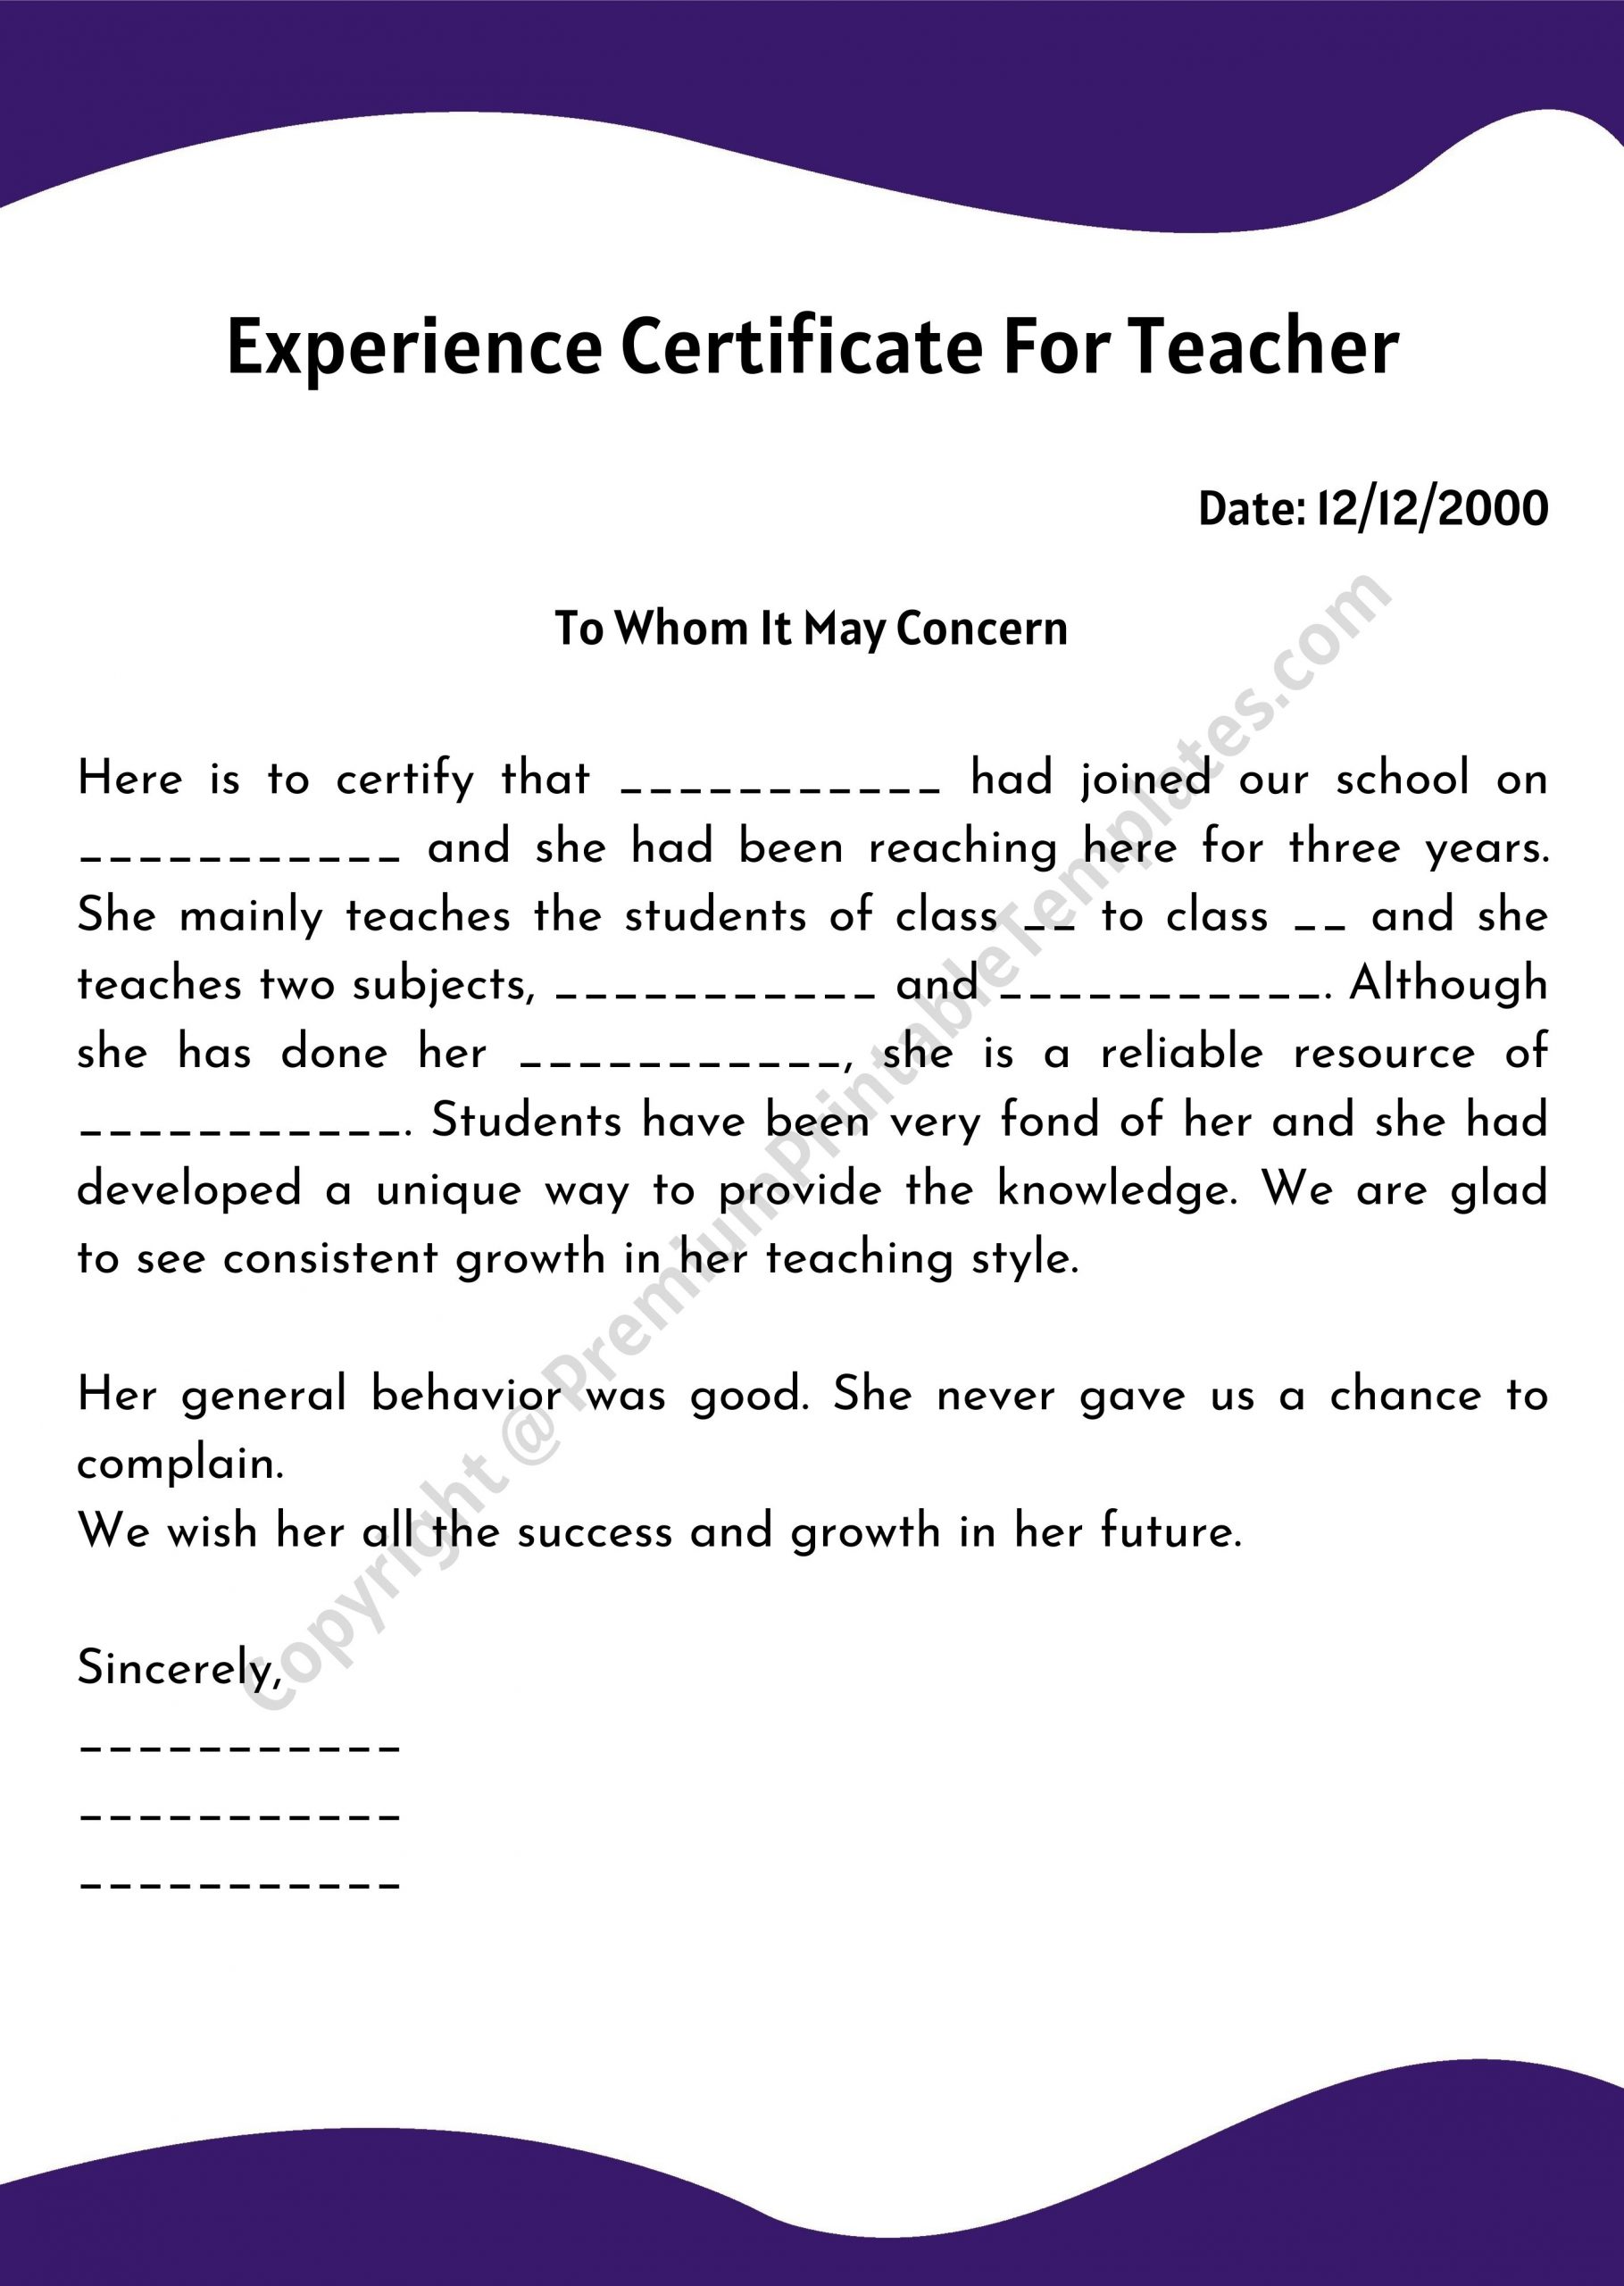 Work experience certificate letter format - fcpole